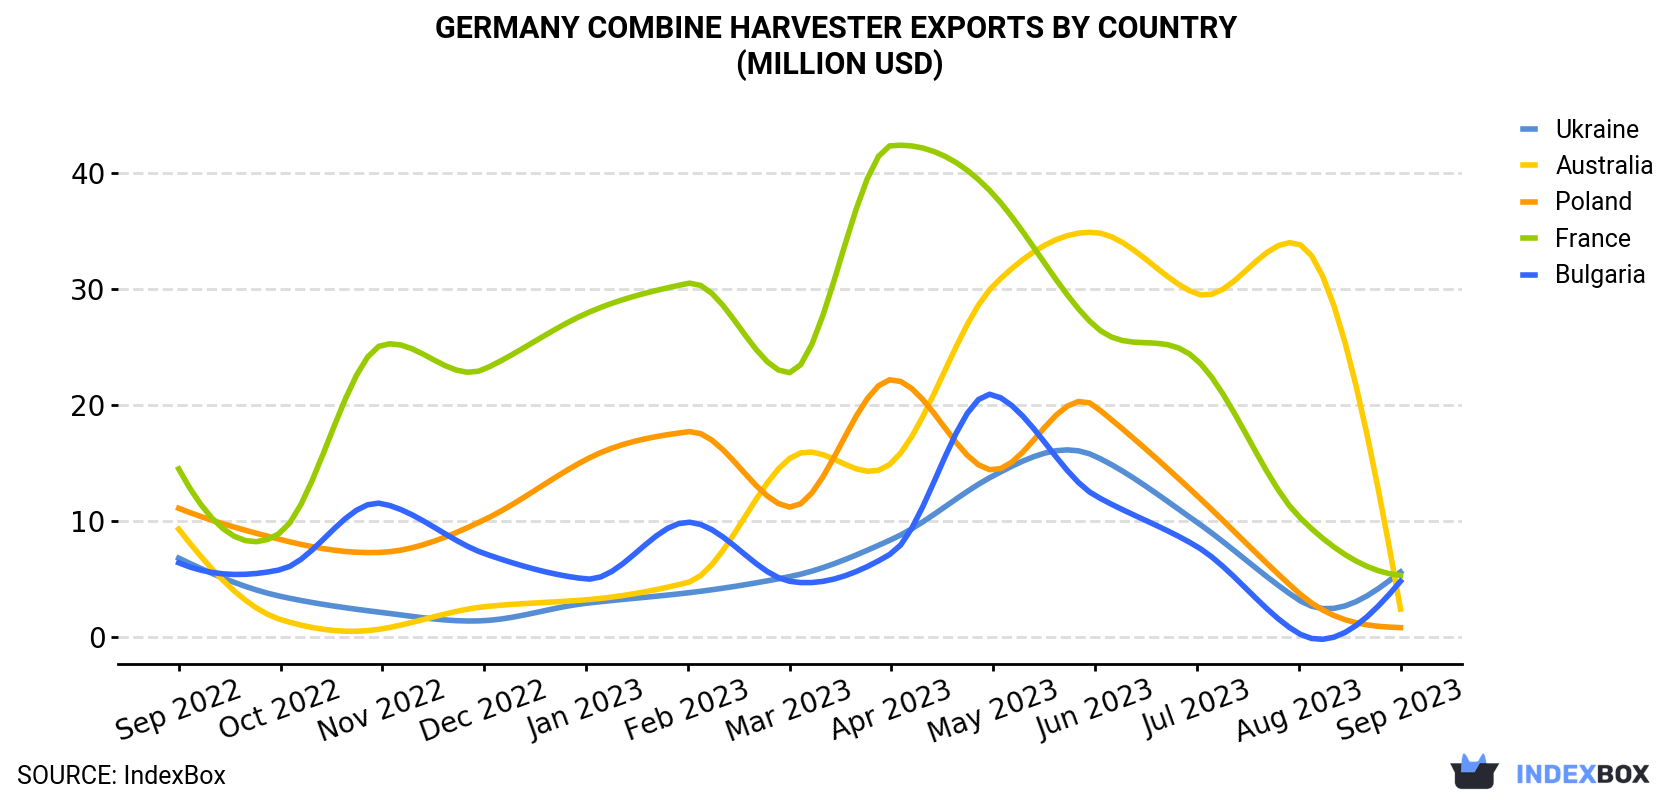 Germany Combine Harvester Exports By Country (Million USD)